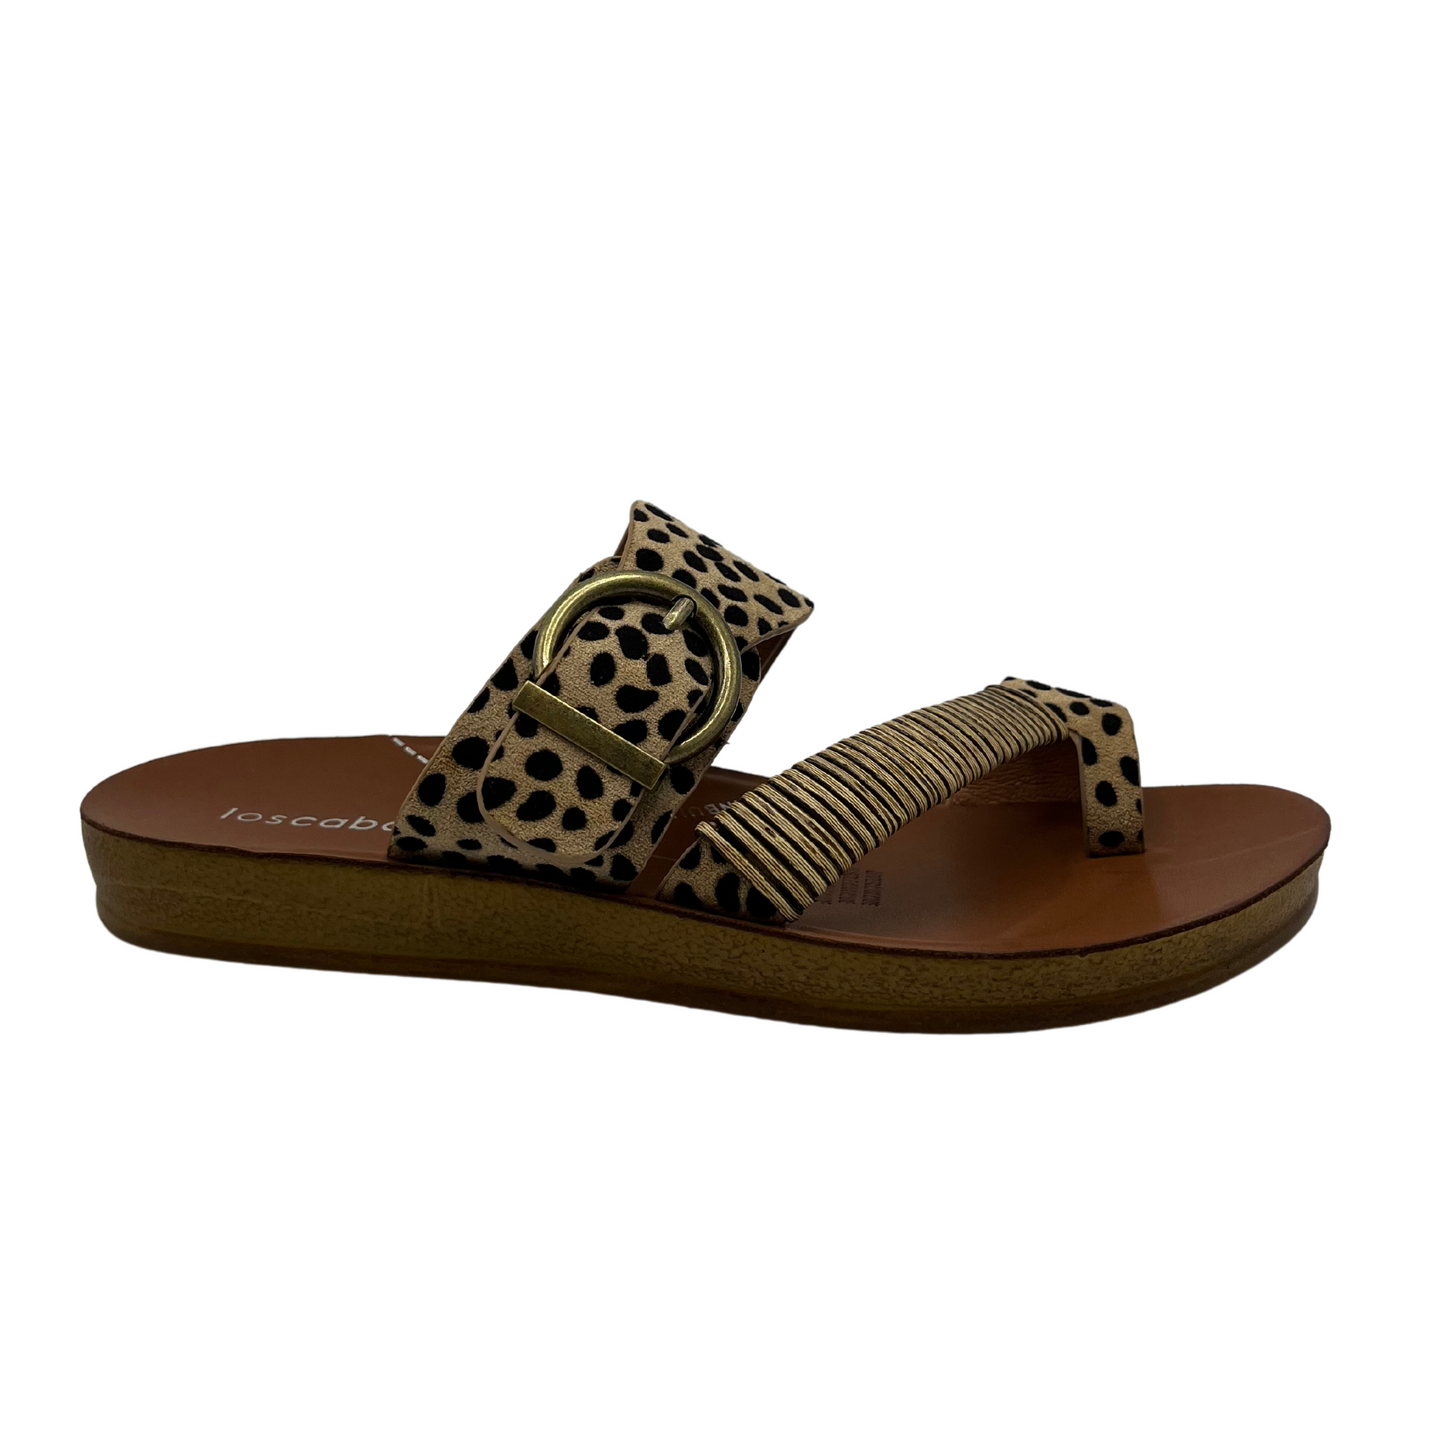 Right view of cheetah leather sandal with gold buckle and brown insole